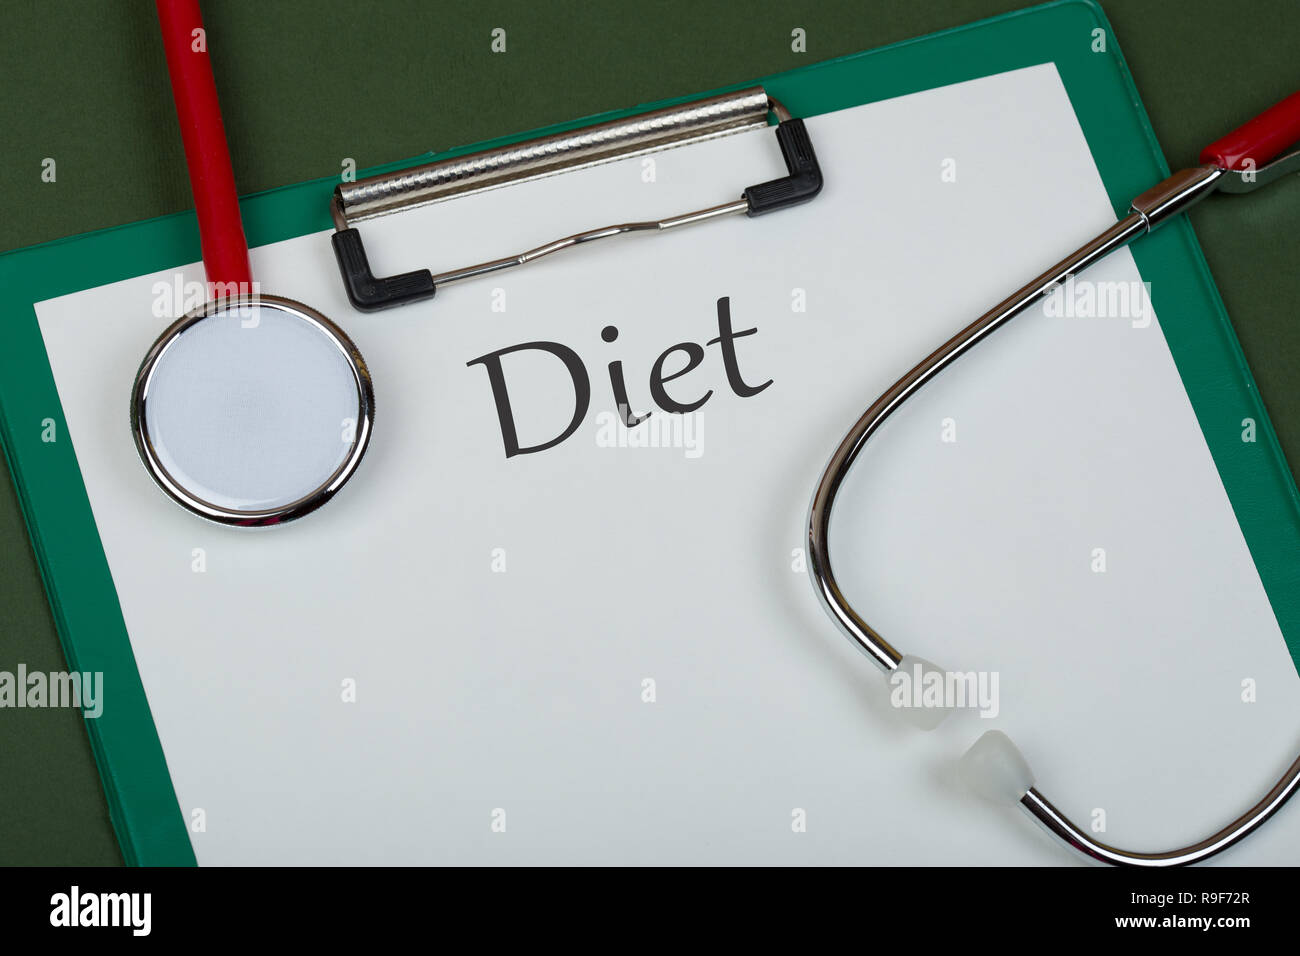 Doctor workplace - red stethoscope and clipboard with text 'Diet' on green paper background Stock Photo